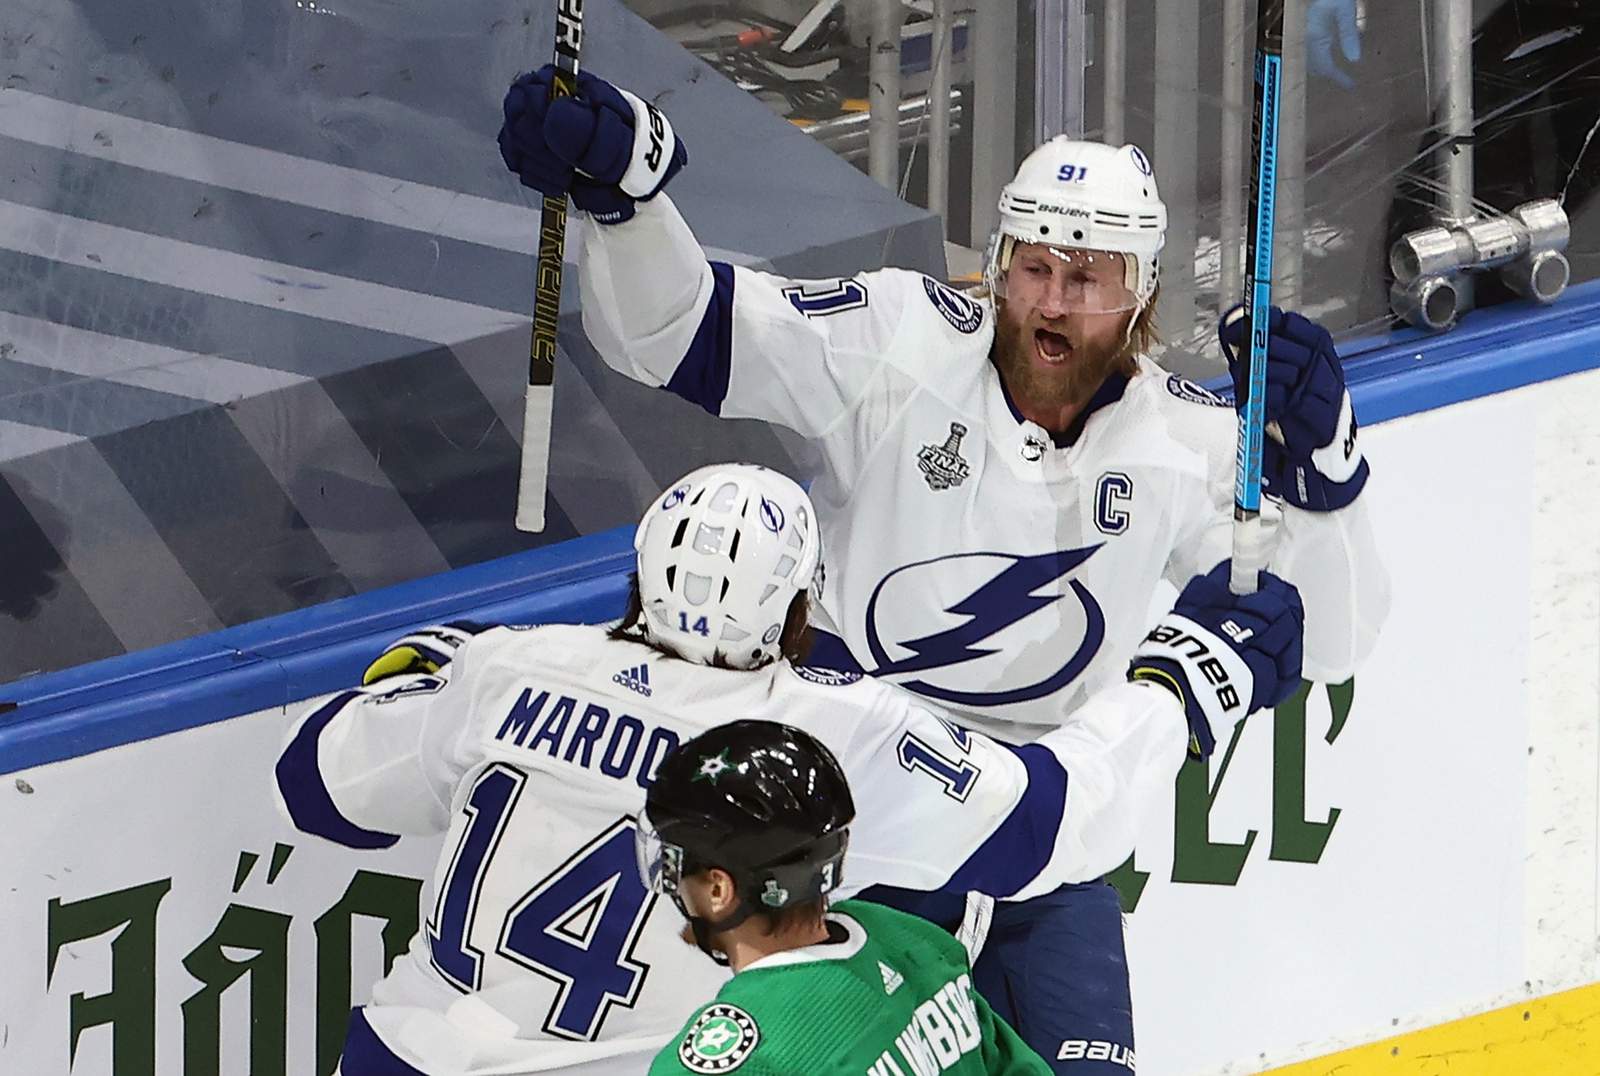 Shattenkirk scores in OT, Lightning up 3-1, on verge of Cup